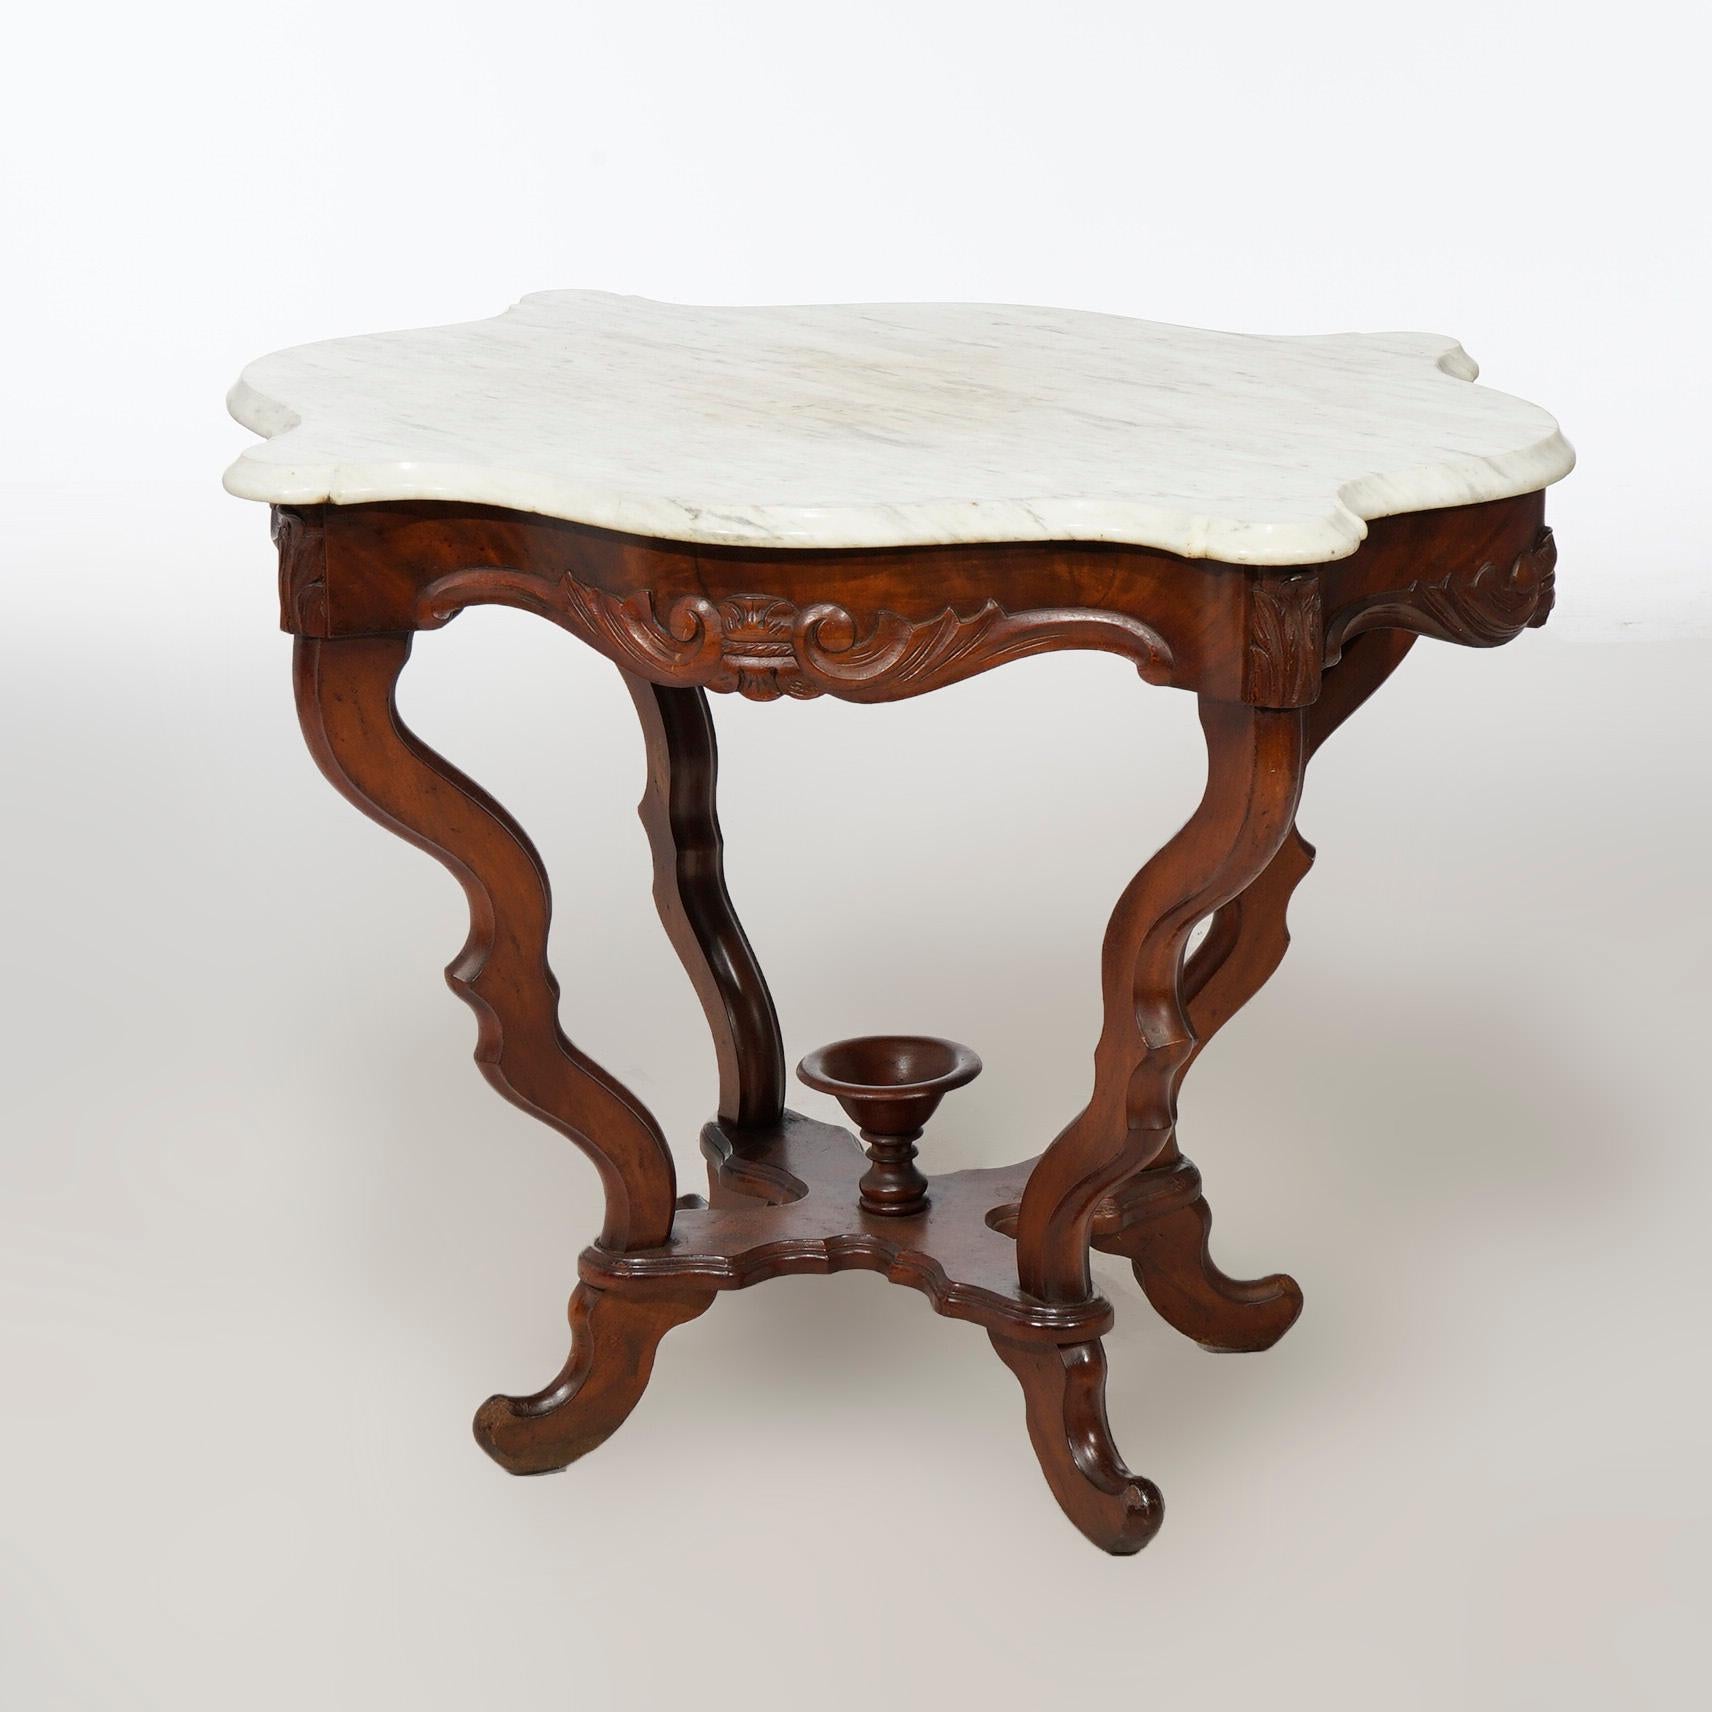 An antique Victorian parlor table offers shaped and beveled marble turtle top over walnut base having scroll form legs and central chalice form finial, c1890

Measures- 28.25''H x 35''W x 25.5''D